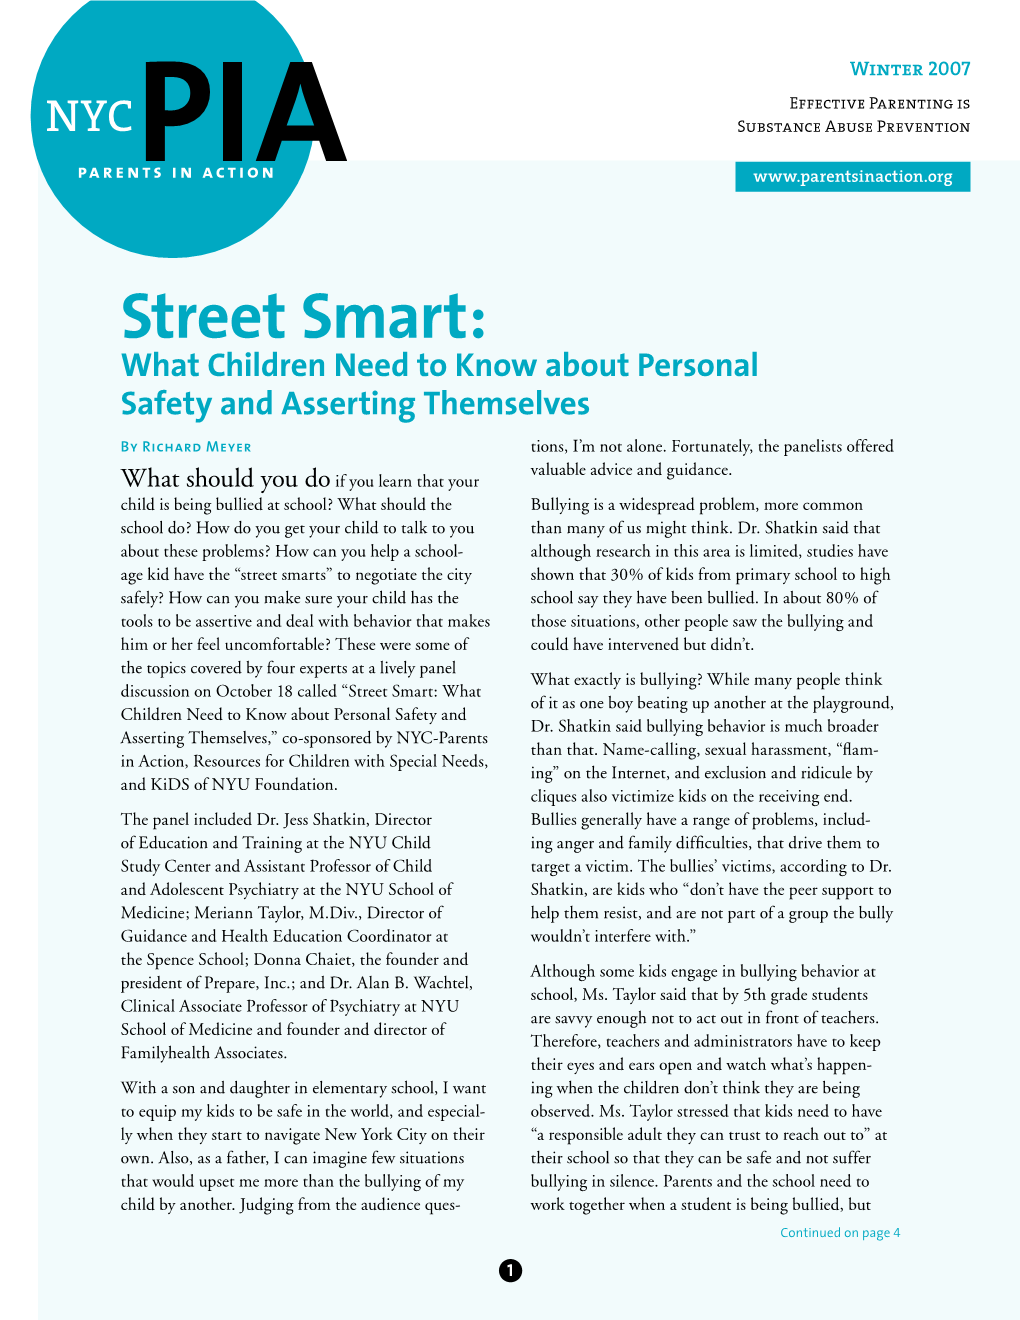 Street Smart: What Children Need to Know About Personal Safety and Asserting Themselves by Richard Meyer Tions, I’M Not Alone